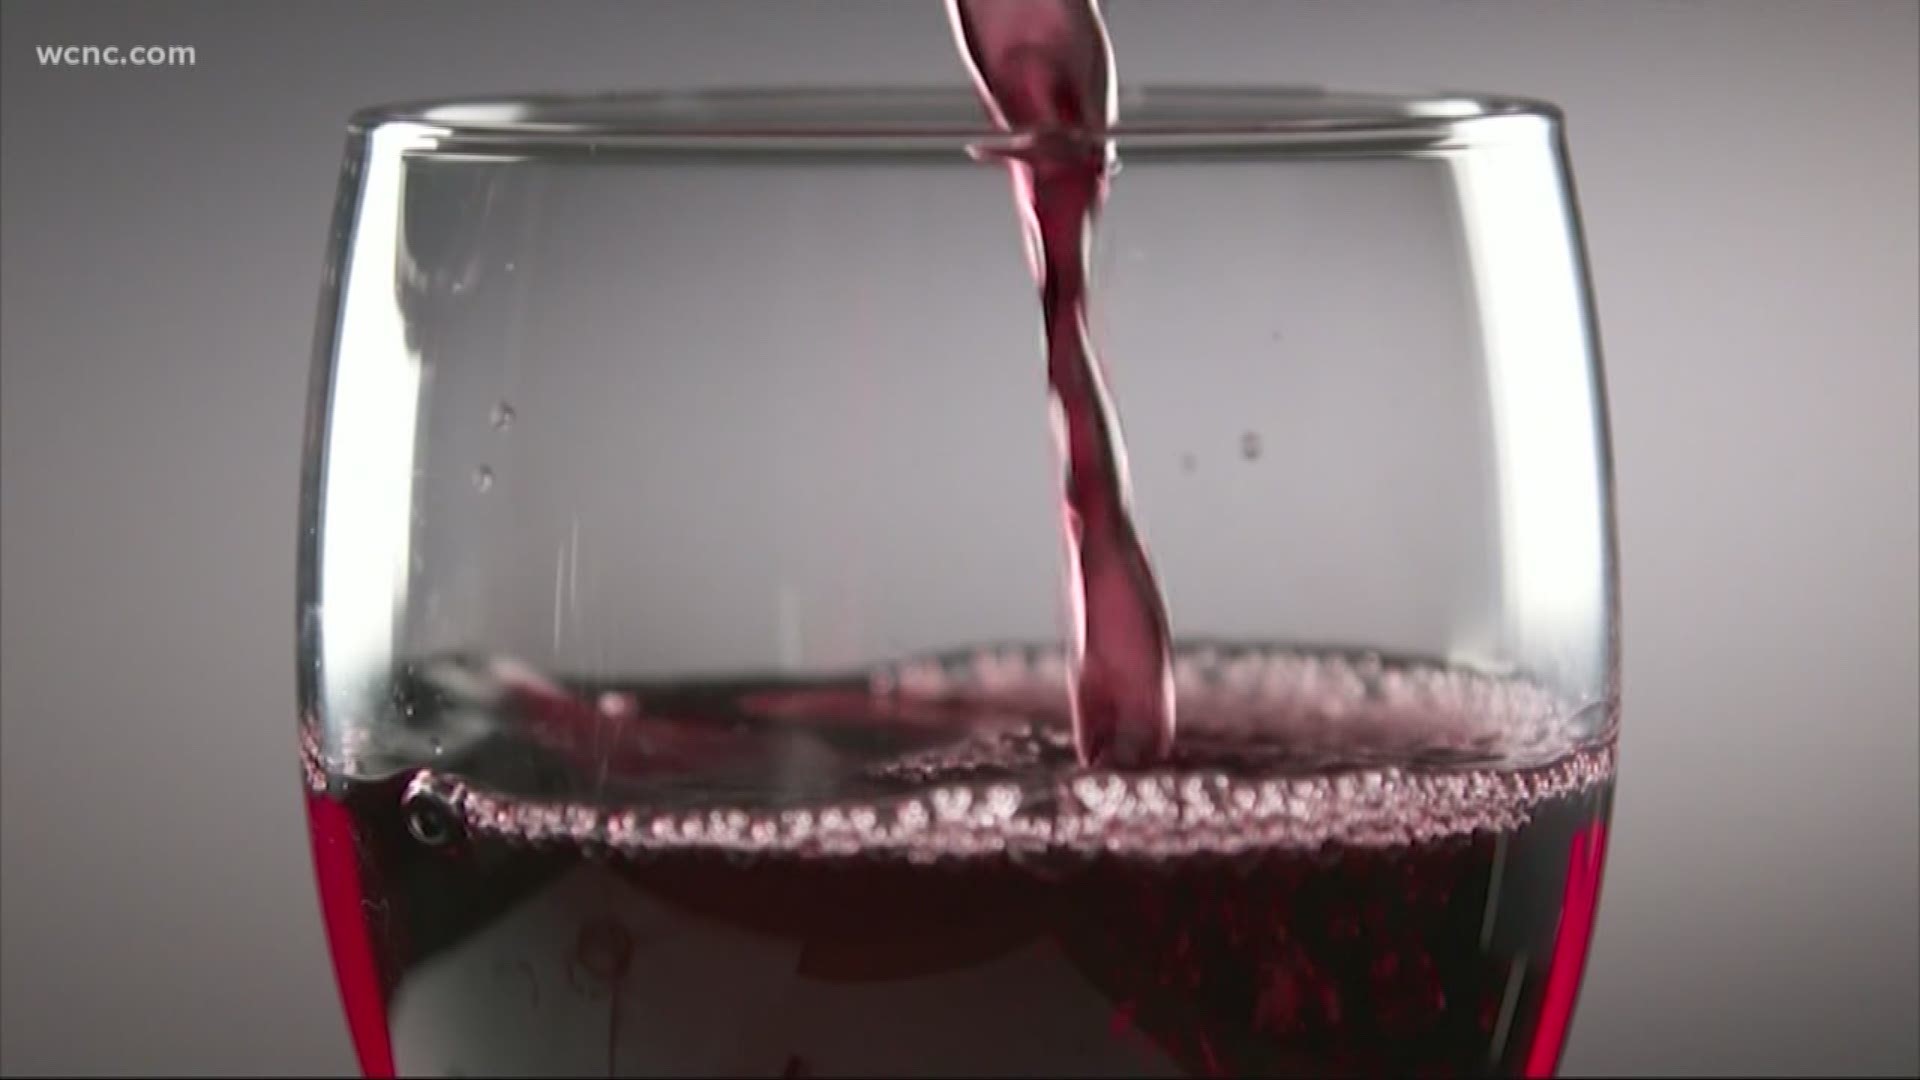 According to wine experts, chilled red wine will bring out the flavor, making it taste better.